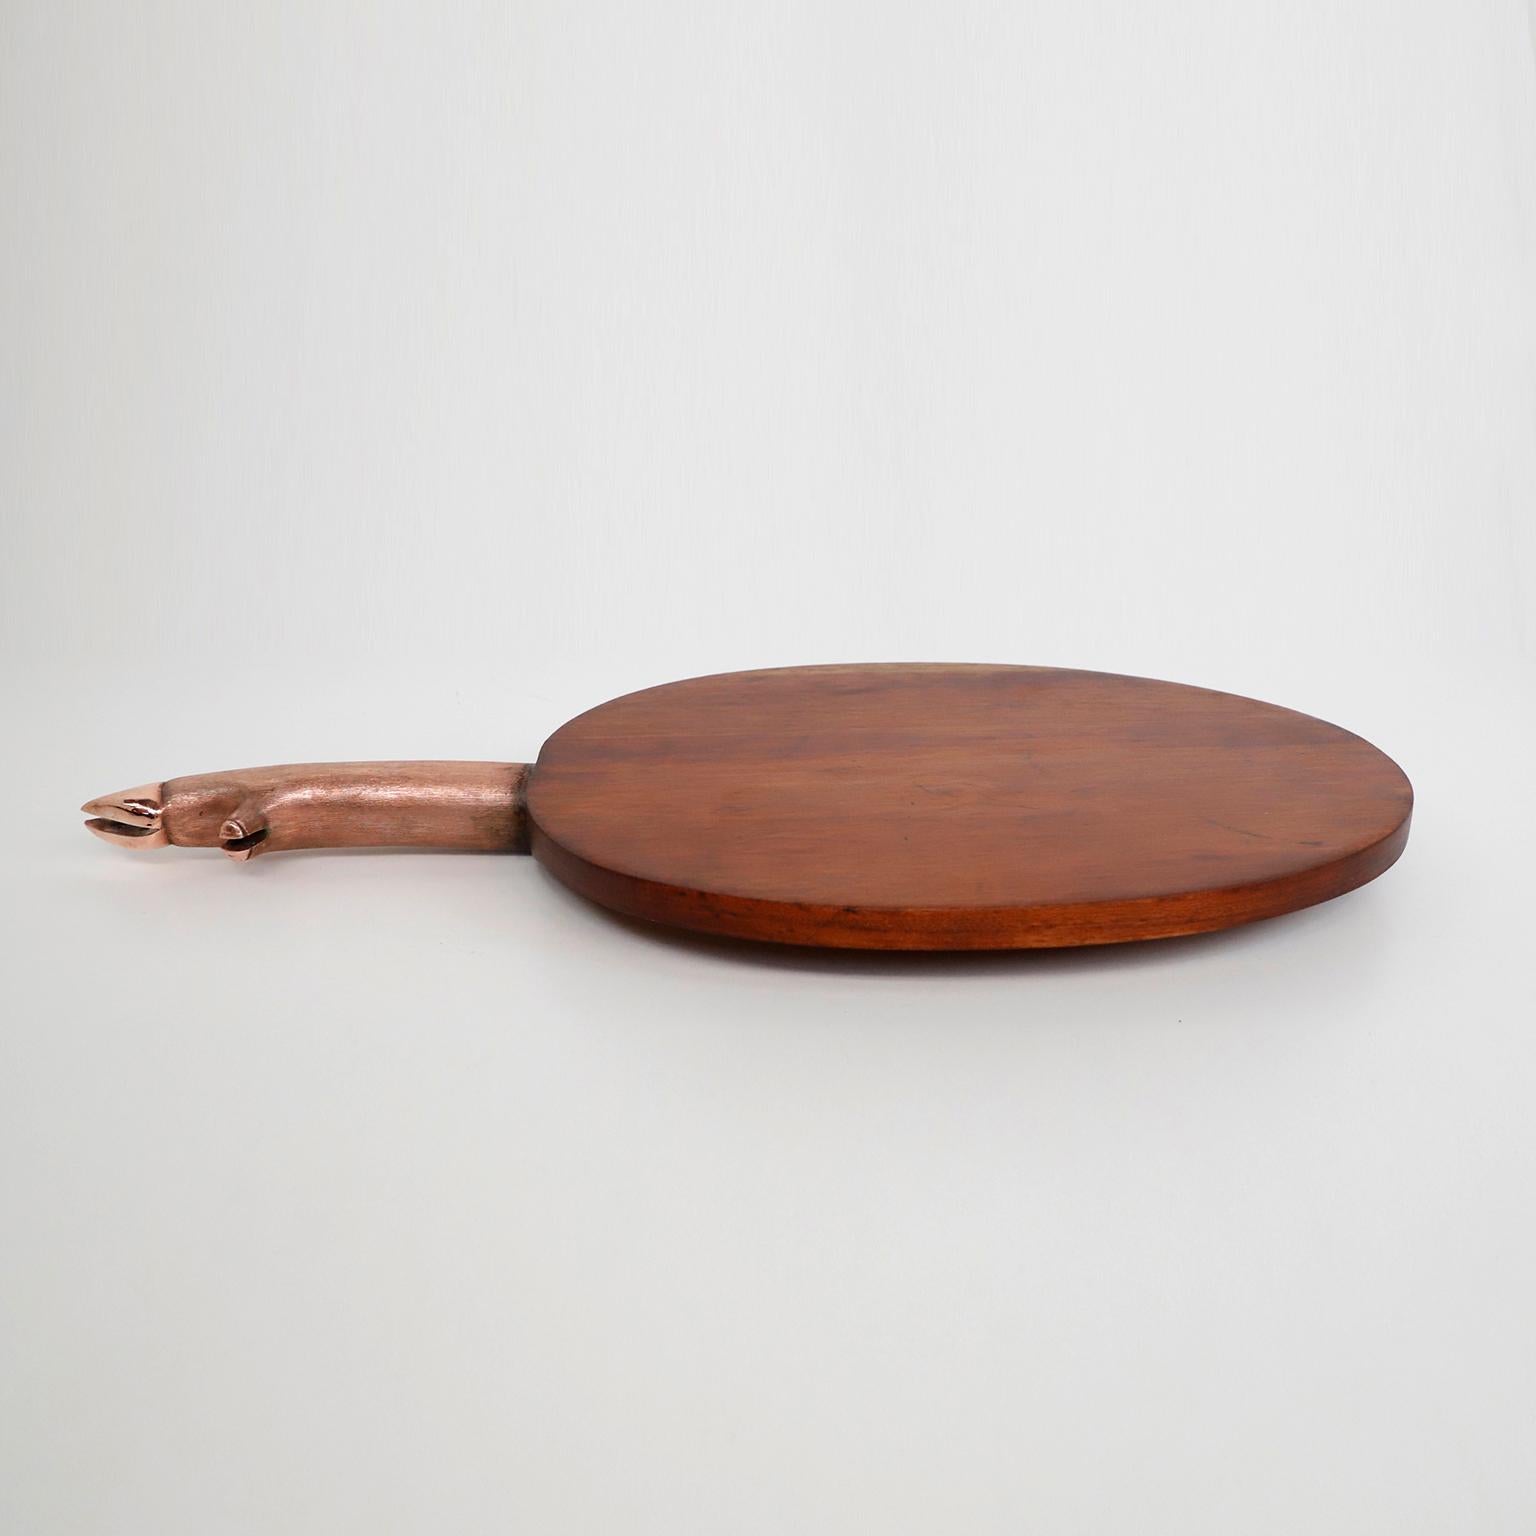 circa 1970. We offer this Cutting and Presenting Board Made of Wood and Copper handle in pig's foot form.